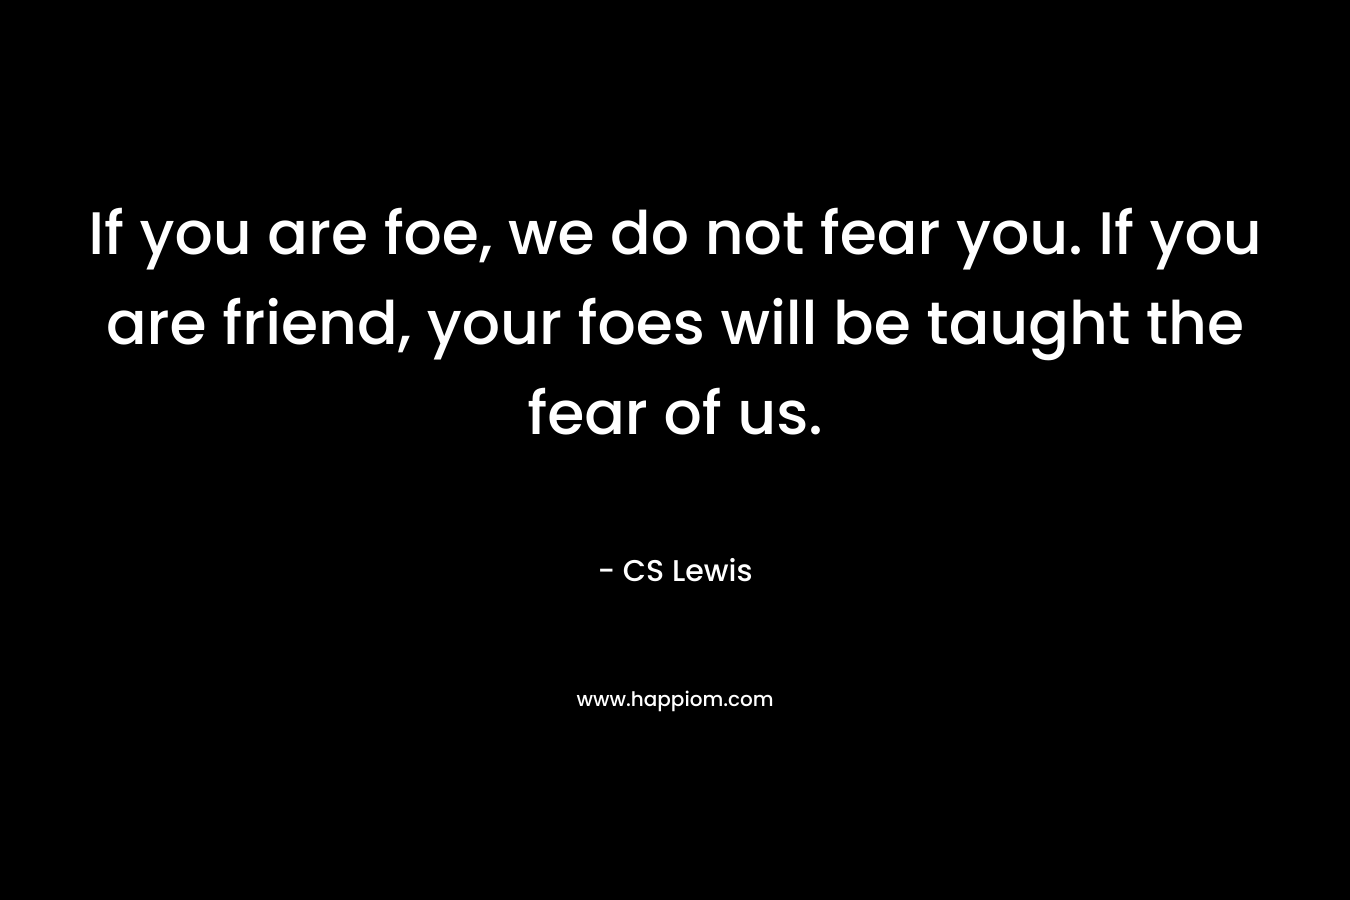 If you are foe, we do not fear you. If you are friend, your foes will be taught the fear of us. – CS Lewis